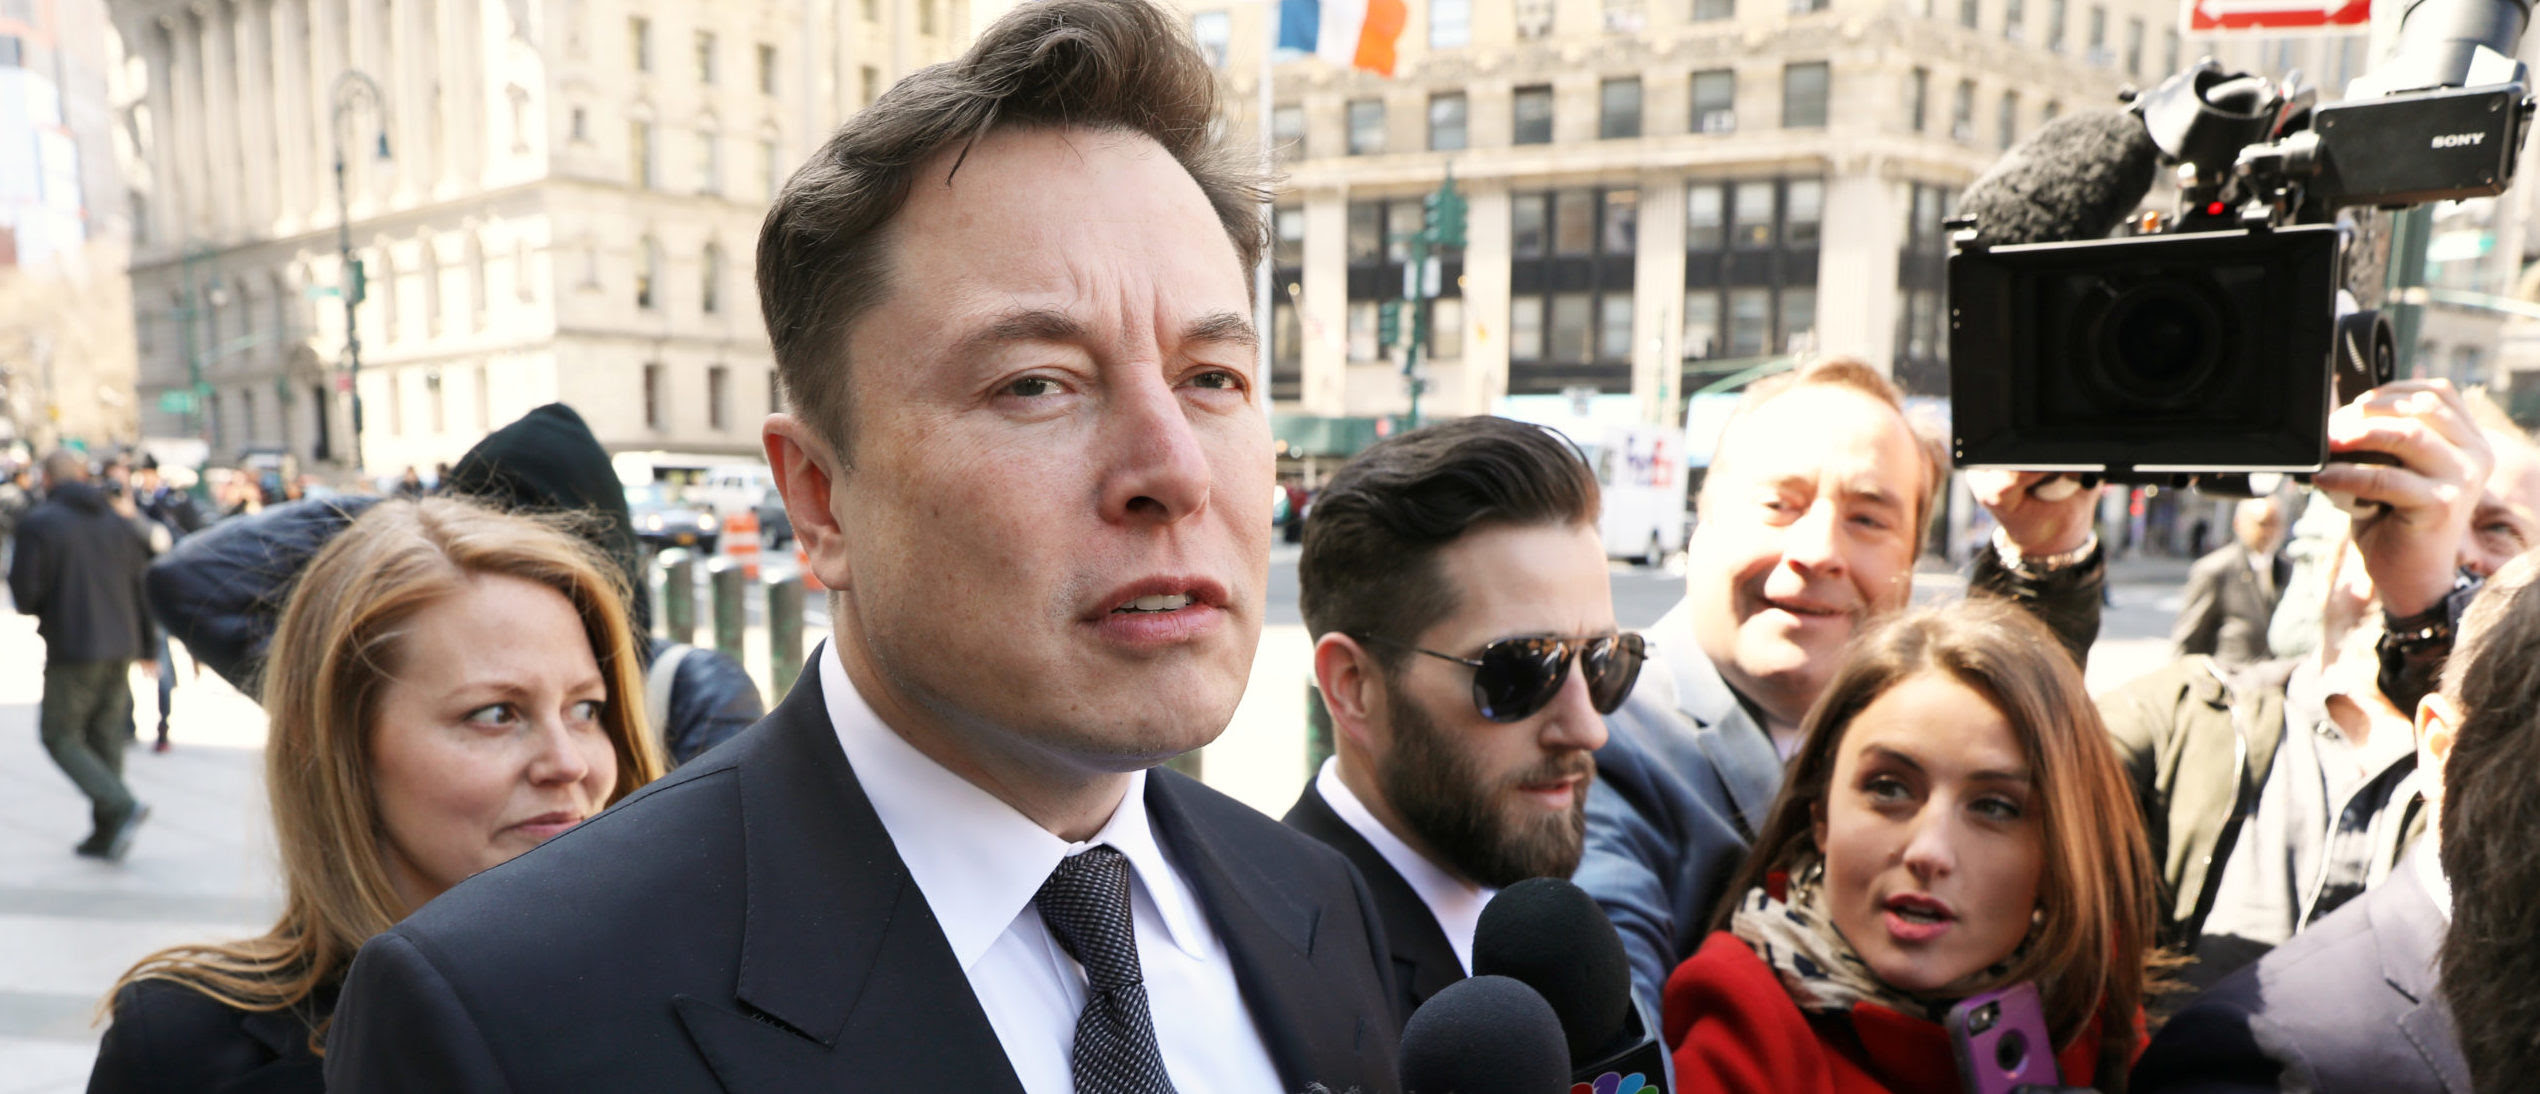 ‘Strongly Believe’: Elon Musk Makes His Stance On The Second Amendment Crystal Clear